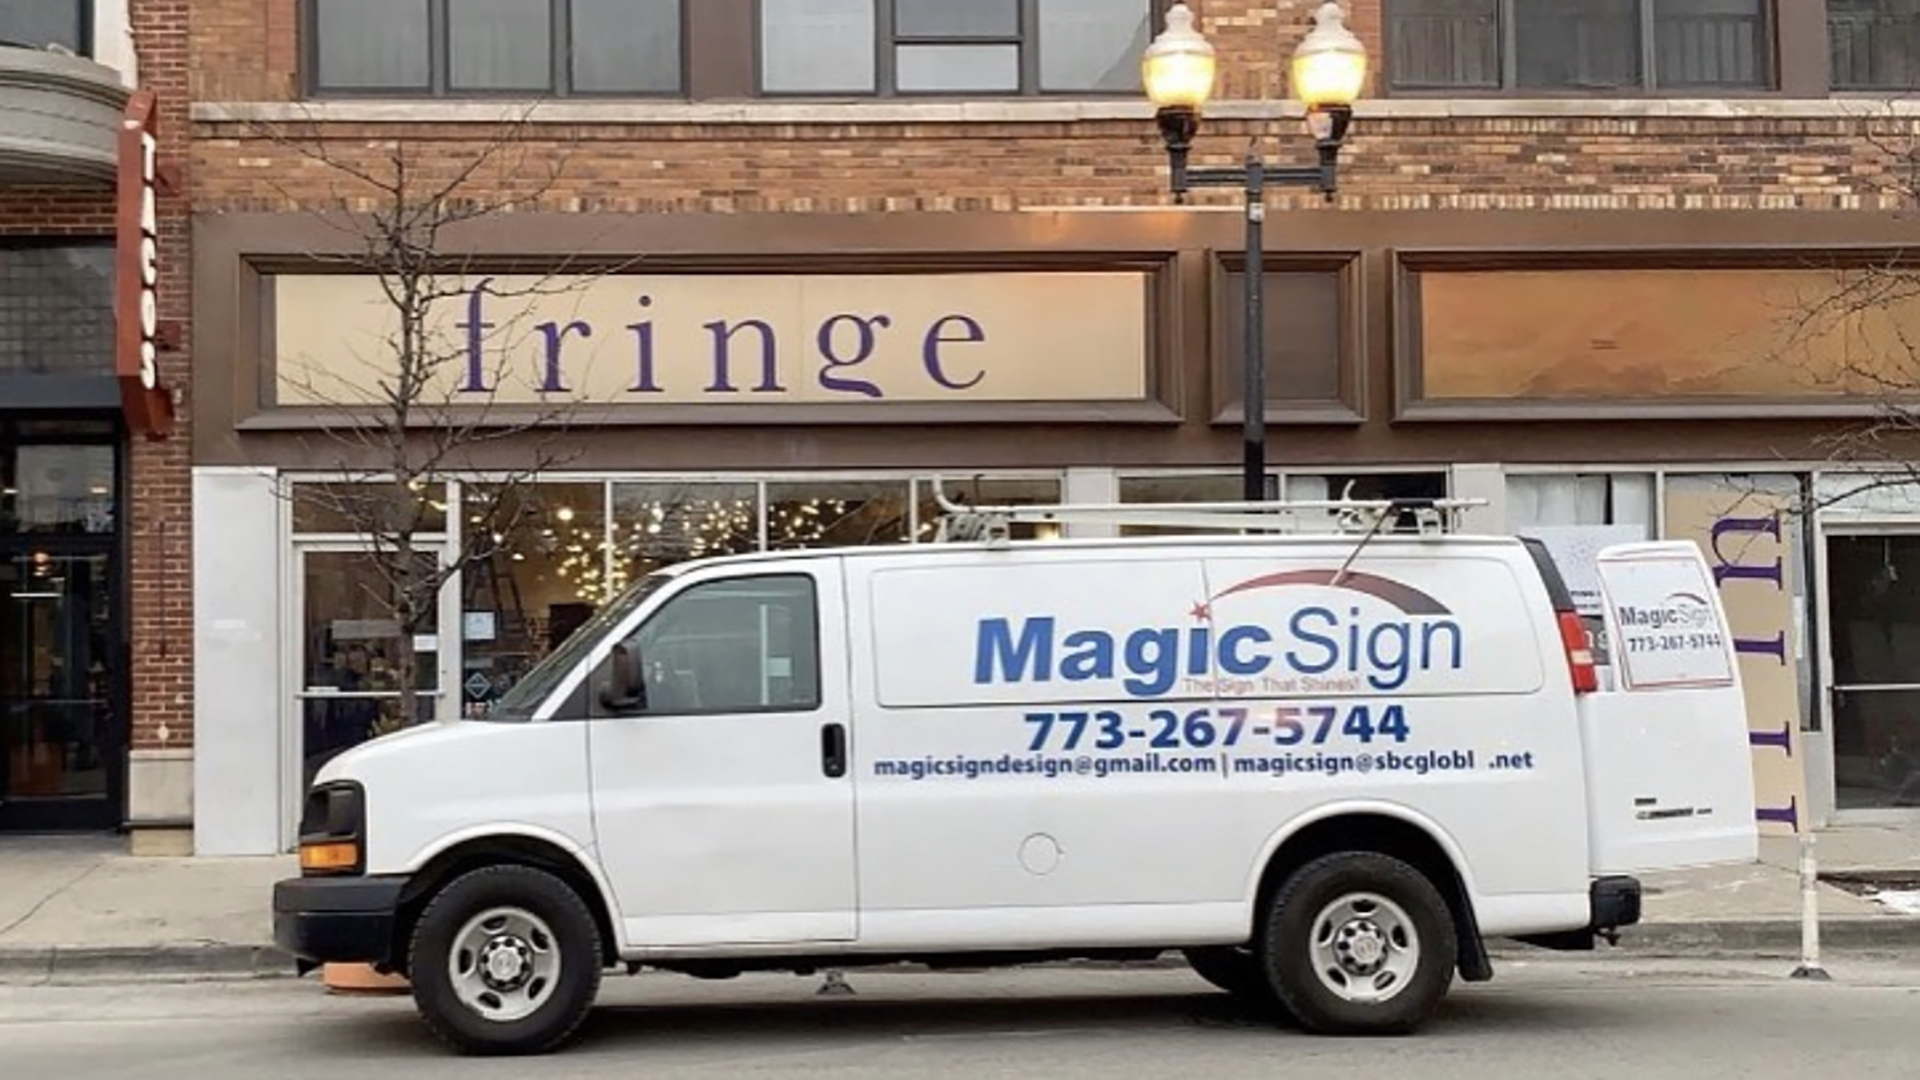 A truck belonging to Syed’s business, Magic Sign.